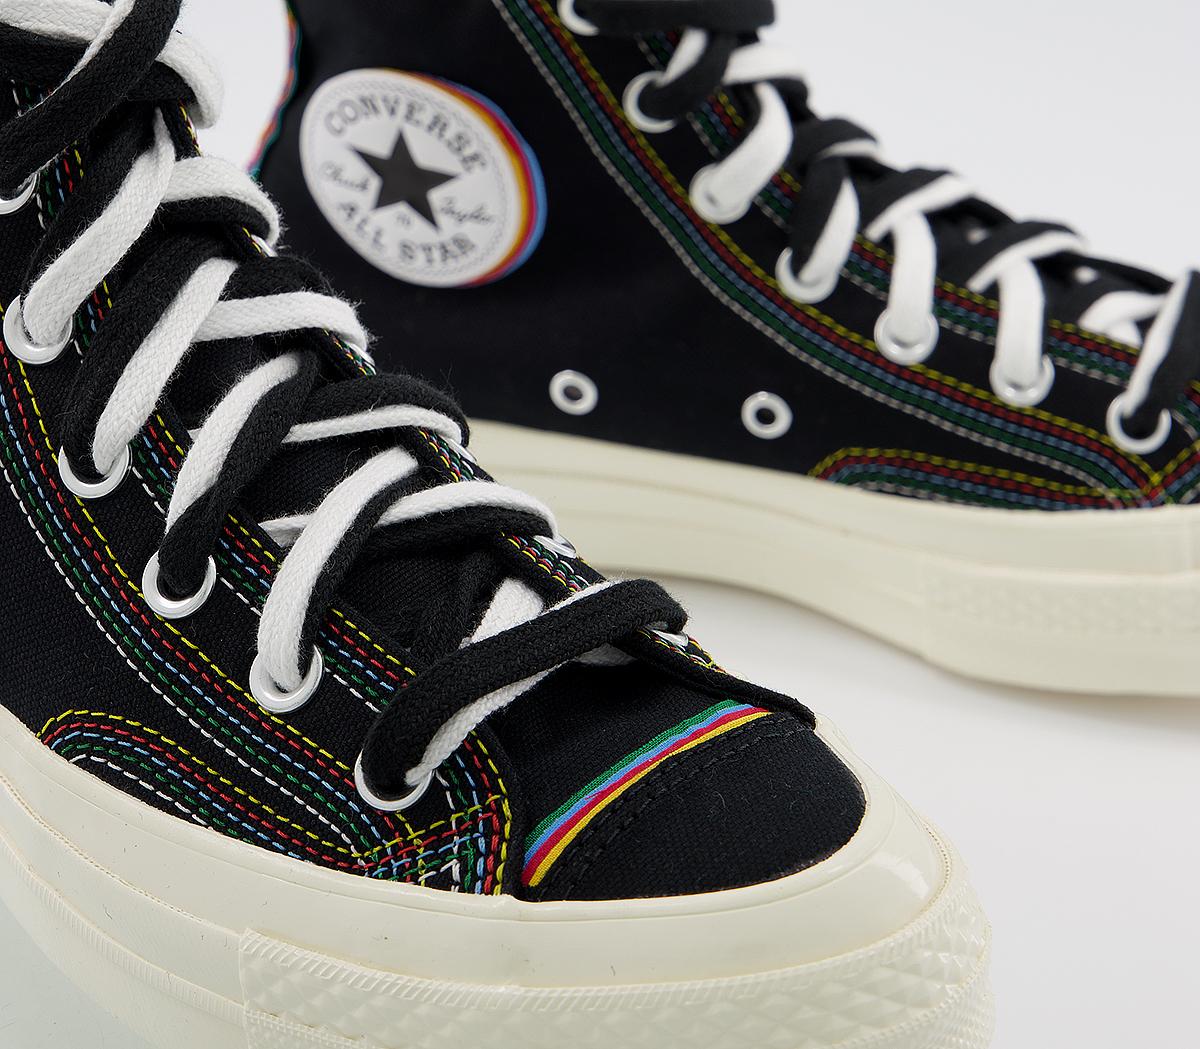 Converse All Star Hi 70 S Trainers Black Multi Egret Layers Exclusive ...